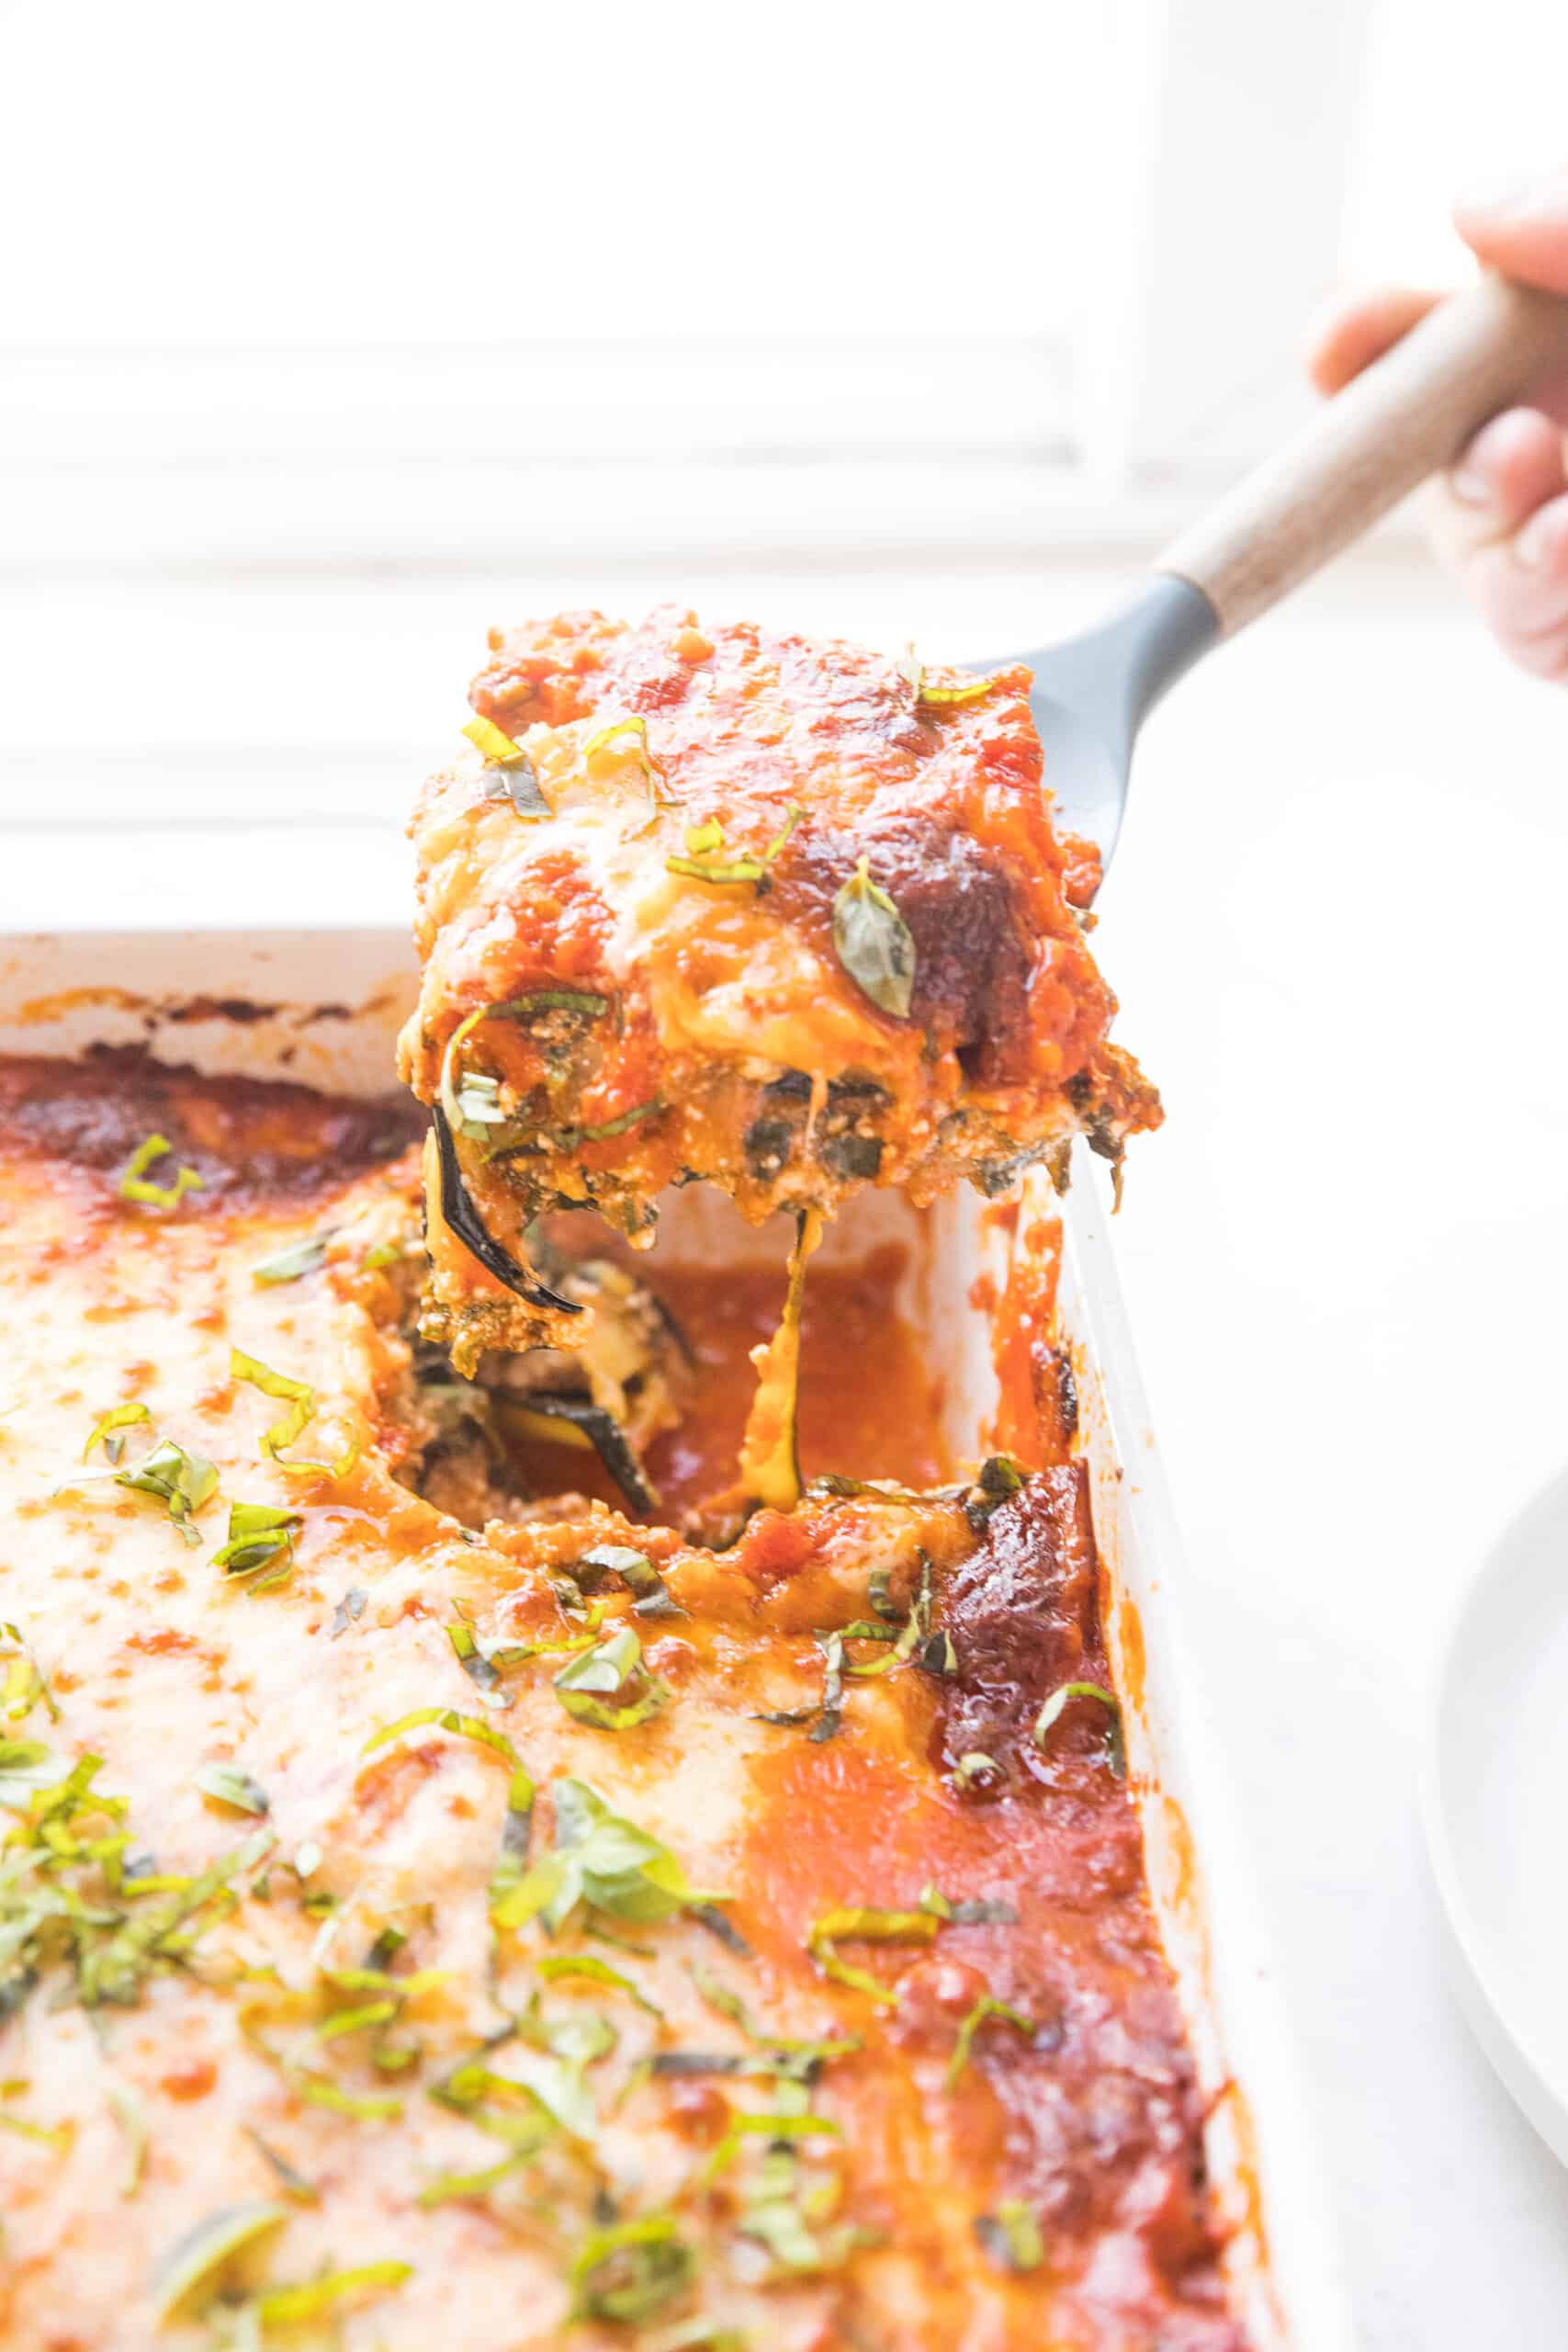 spooning out a portion of keto low carb lasagna made with zucchini noodles from the baking dish